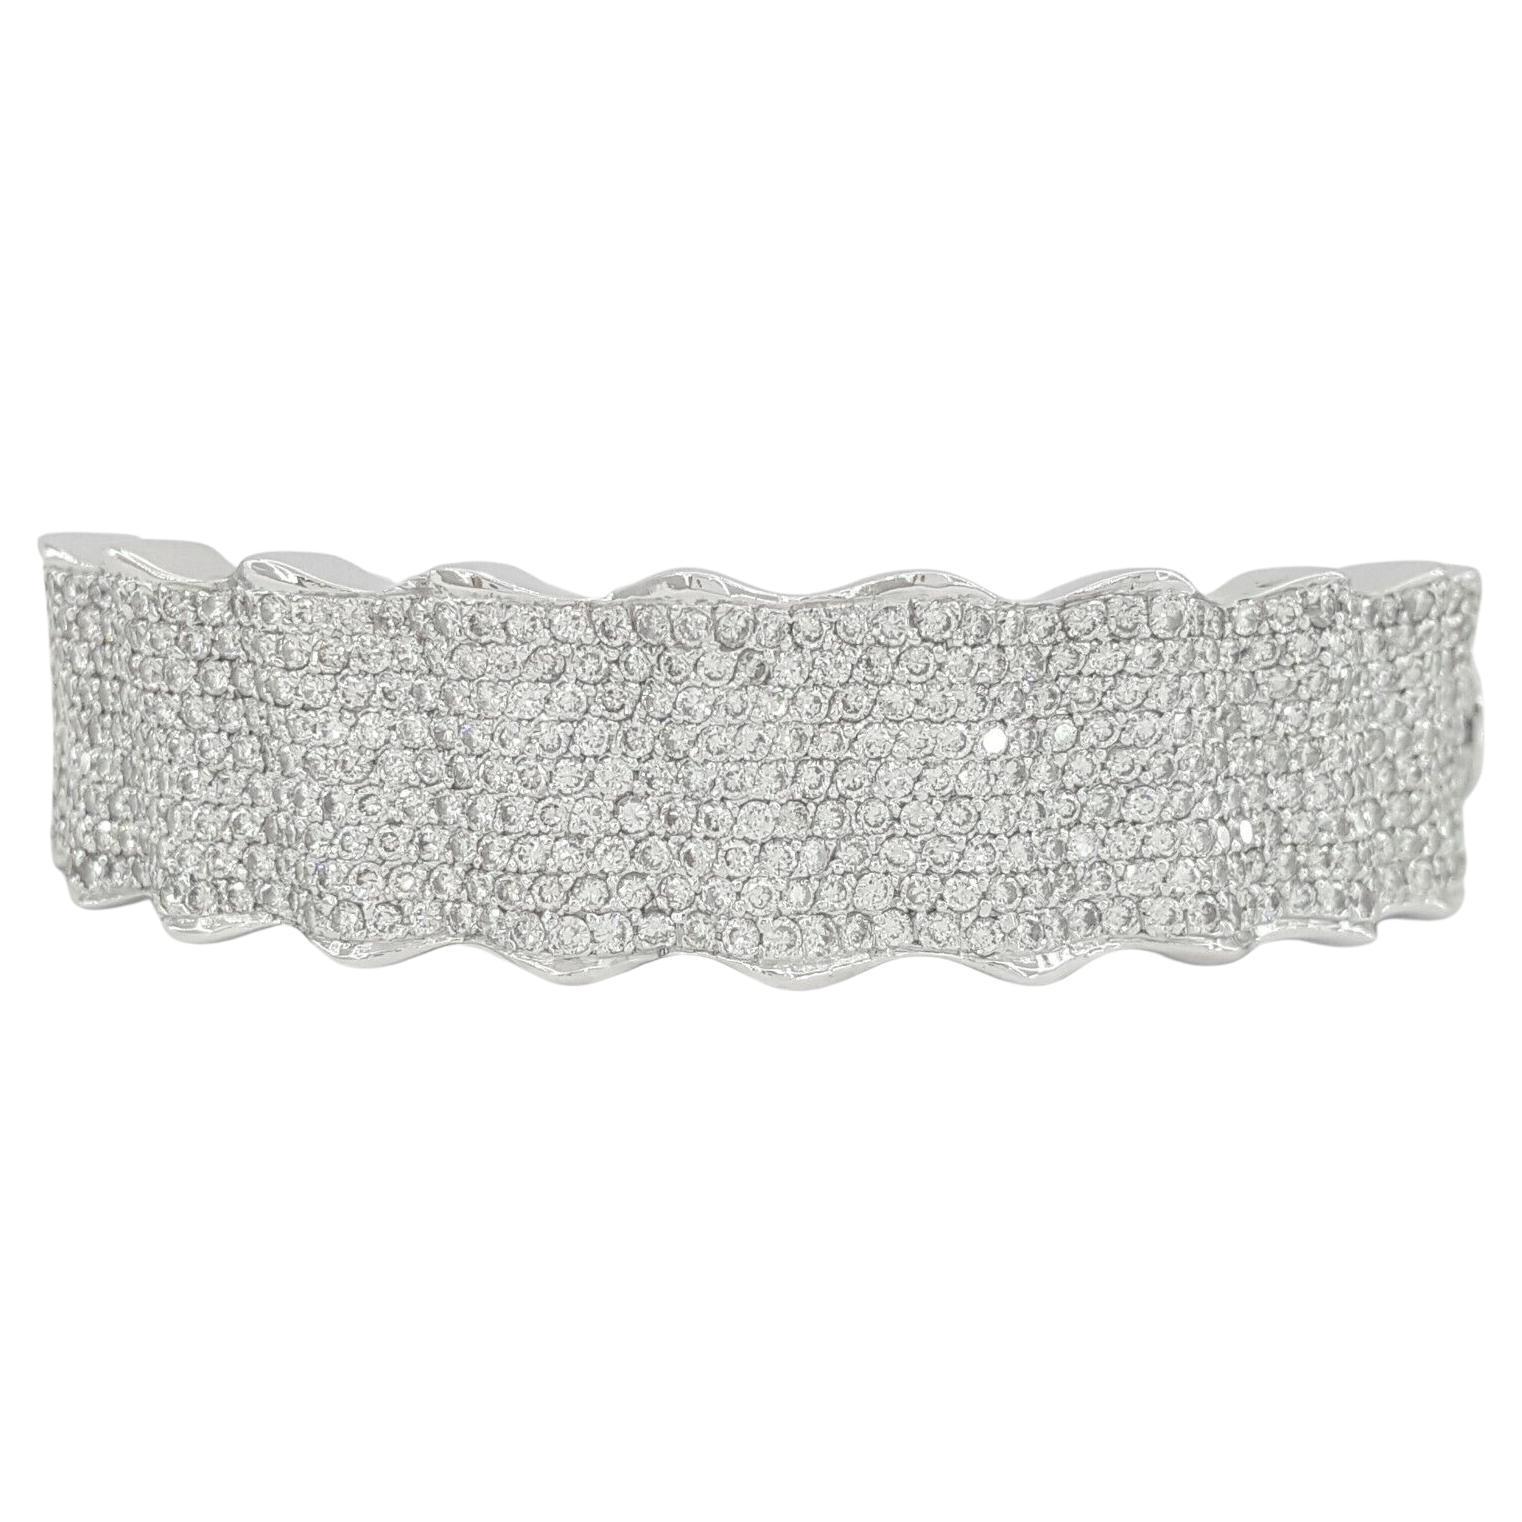 60 Grams 18 Carat White Gold 8 Carat Diamond Bracelet  In Excellent Condition For Sale In Rome, IT